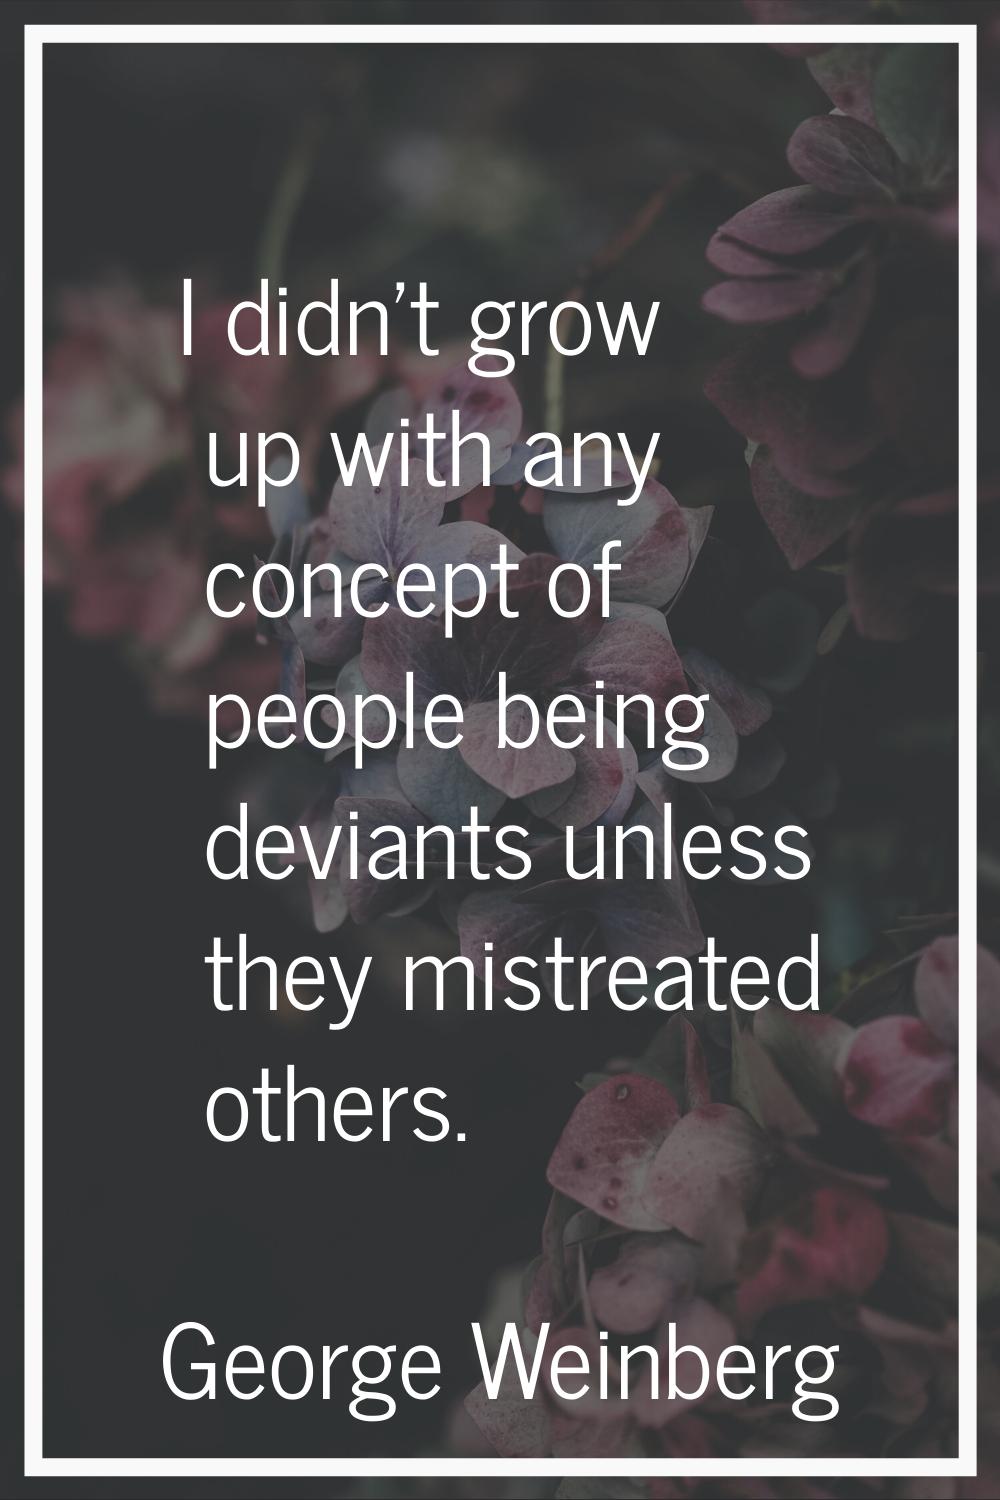 I didn't grow up with any concept of people being deviants unless they mistreated others.